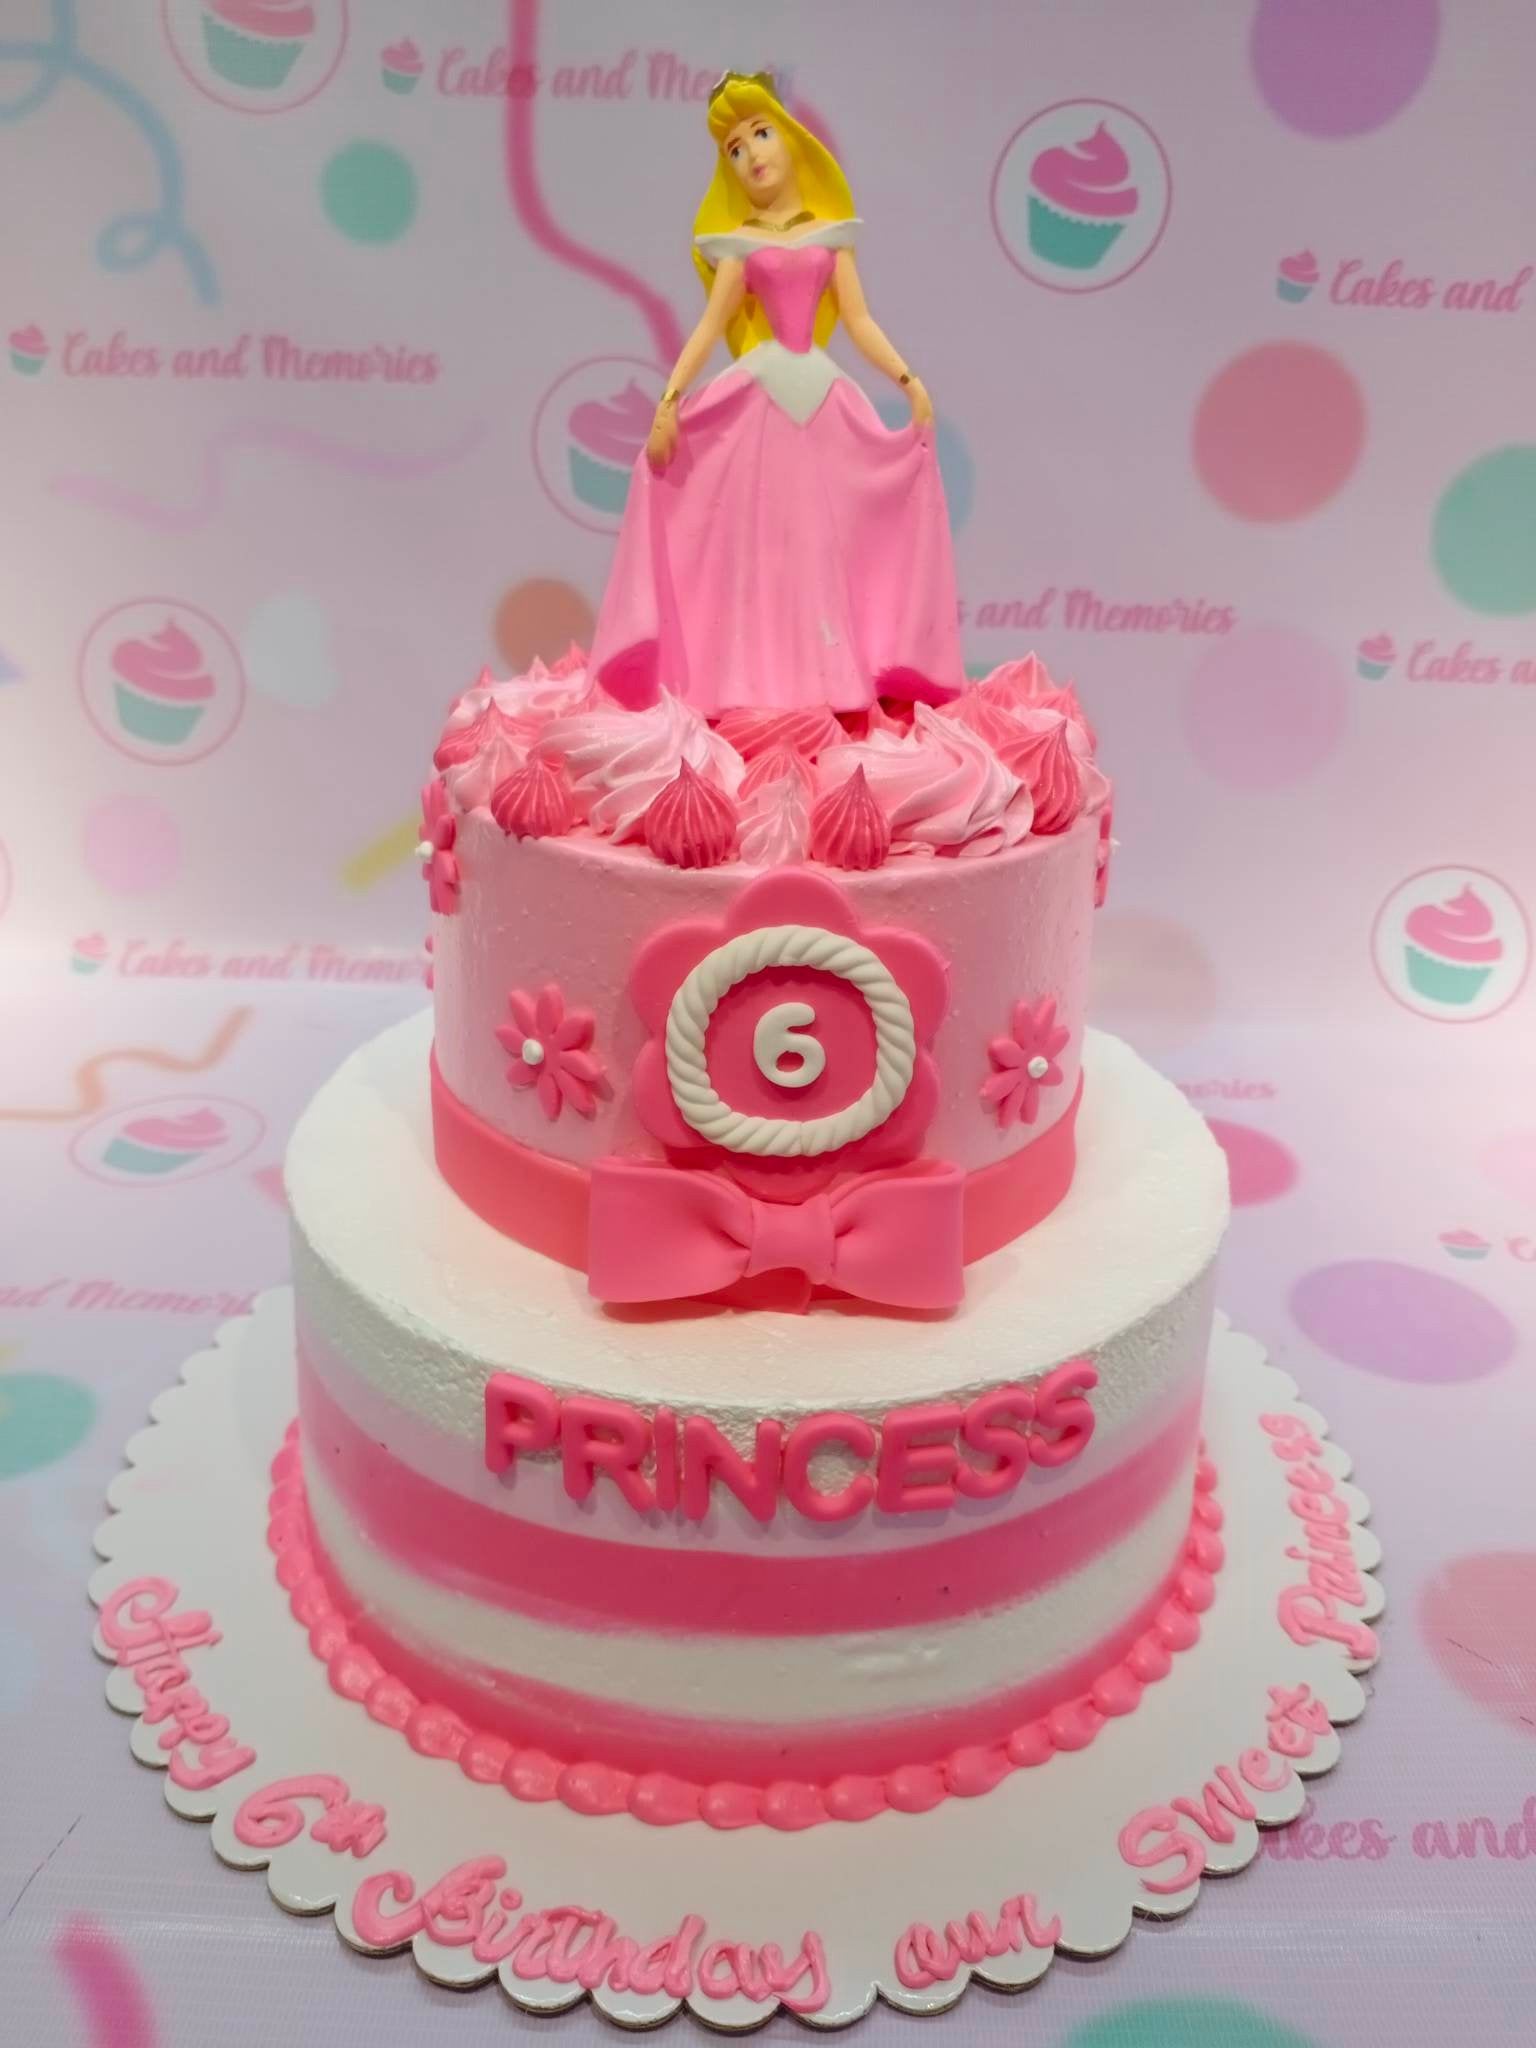 This Aurora Cake is a perfect way to add a touch of enchantment to your special event. It is decorated with bright pink stripes and featuring Sleeping Beauty and Disney Princess designs, making it a perfect treat for any princess-themed celebration. Crafted with great attention to detail, this cake is sure to bring a little magic to your day!